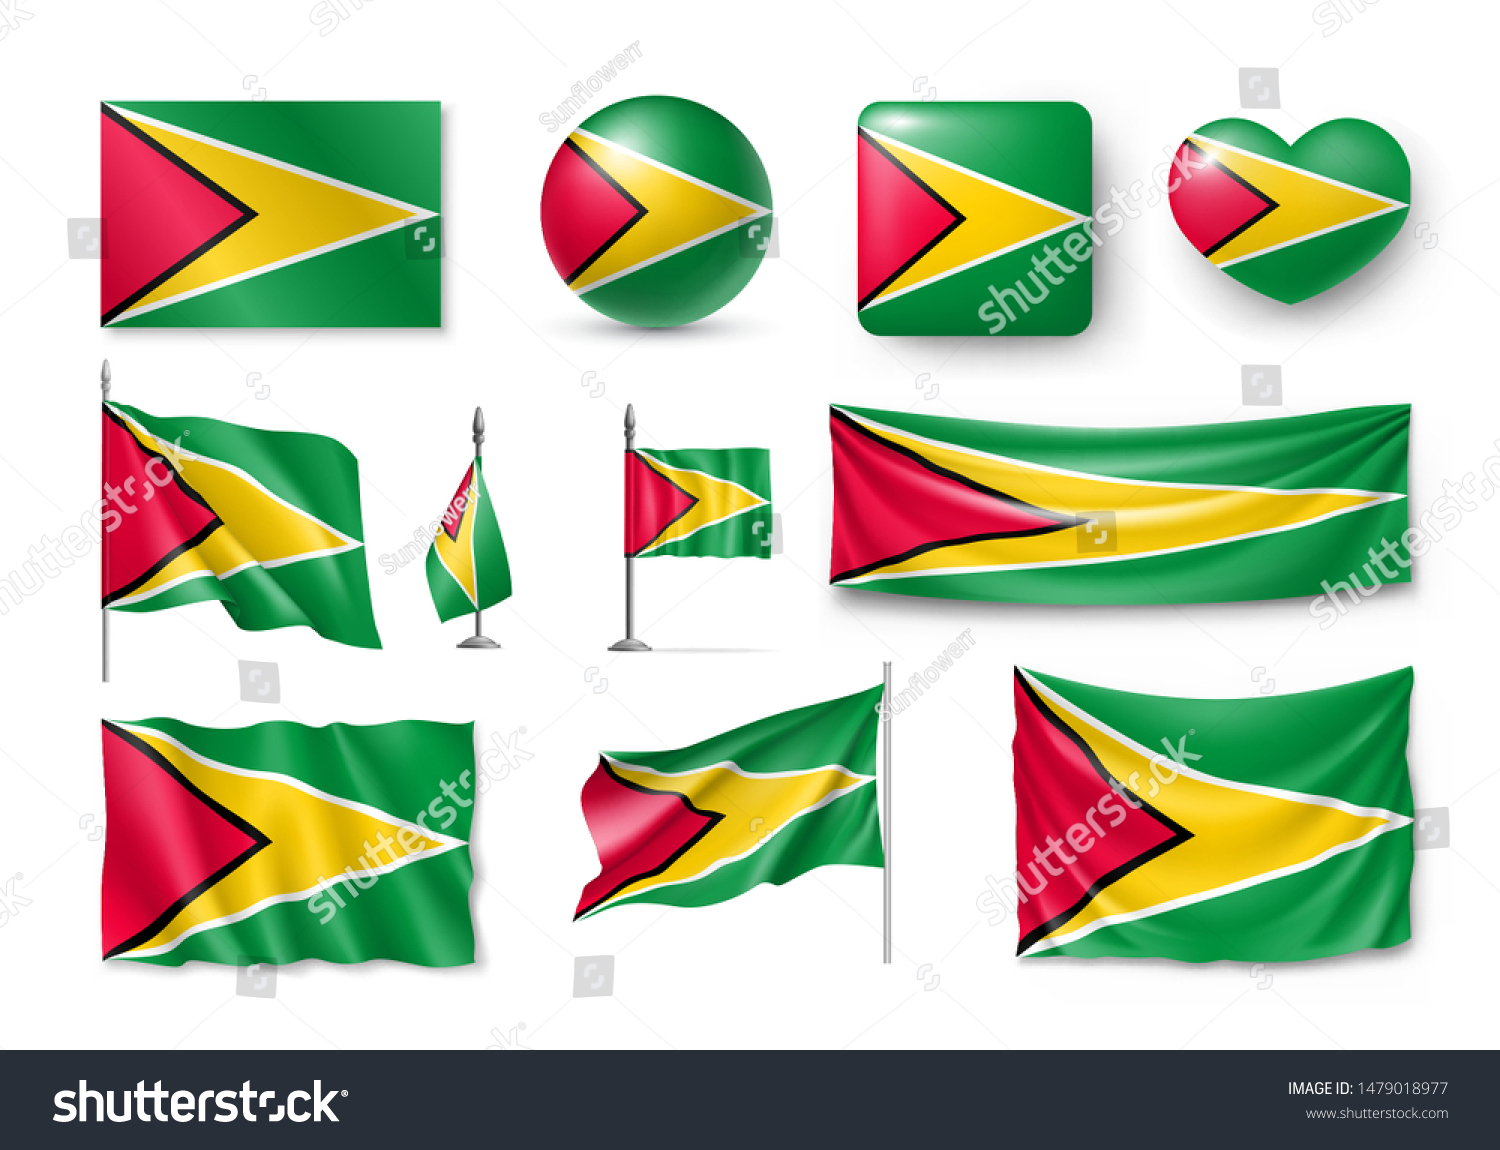 SVG of Various flags of Guyana independent country set. Realistic waving national flag on pole, table flag and different shapes badges. Patriotic guyanese rendering symbols isolated vector illustration. svg